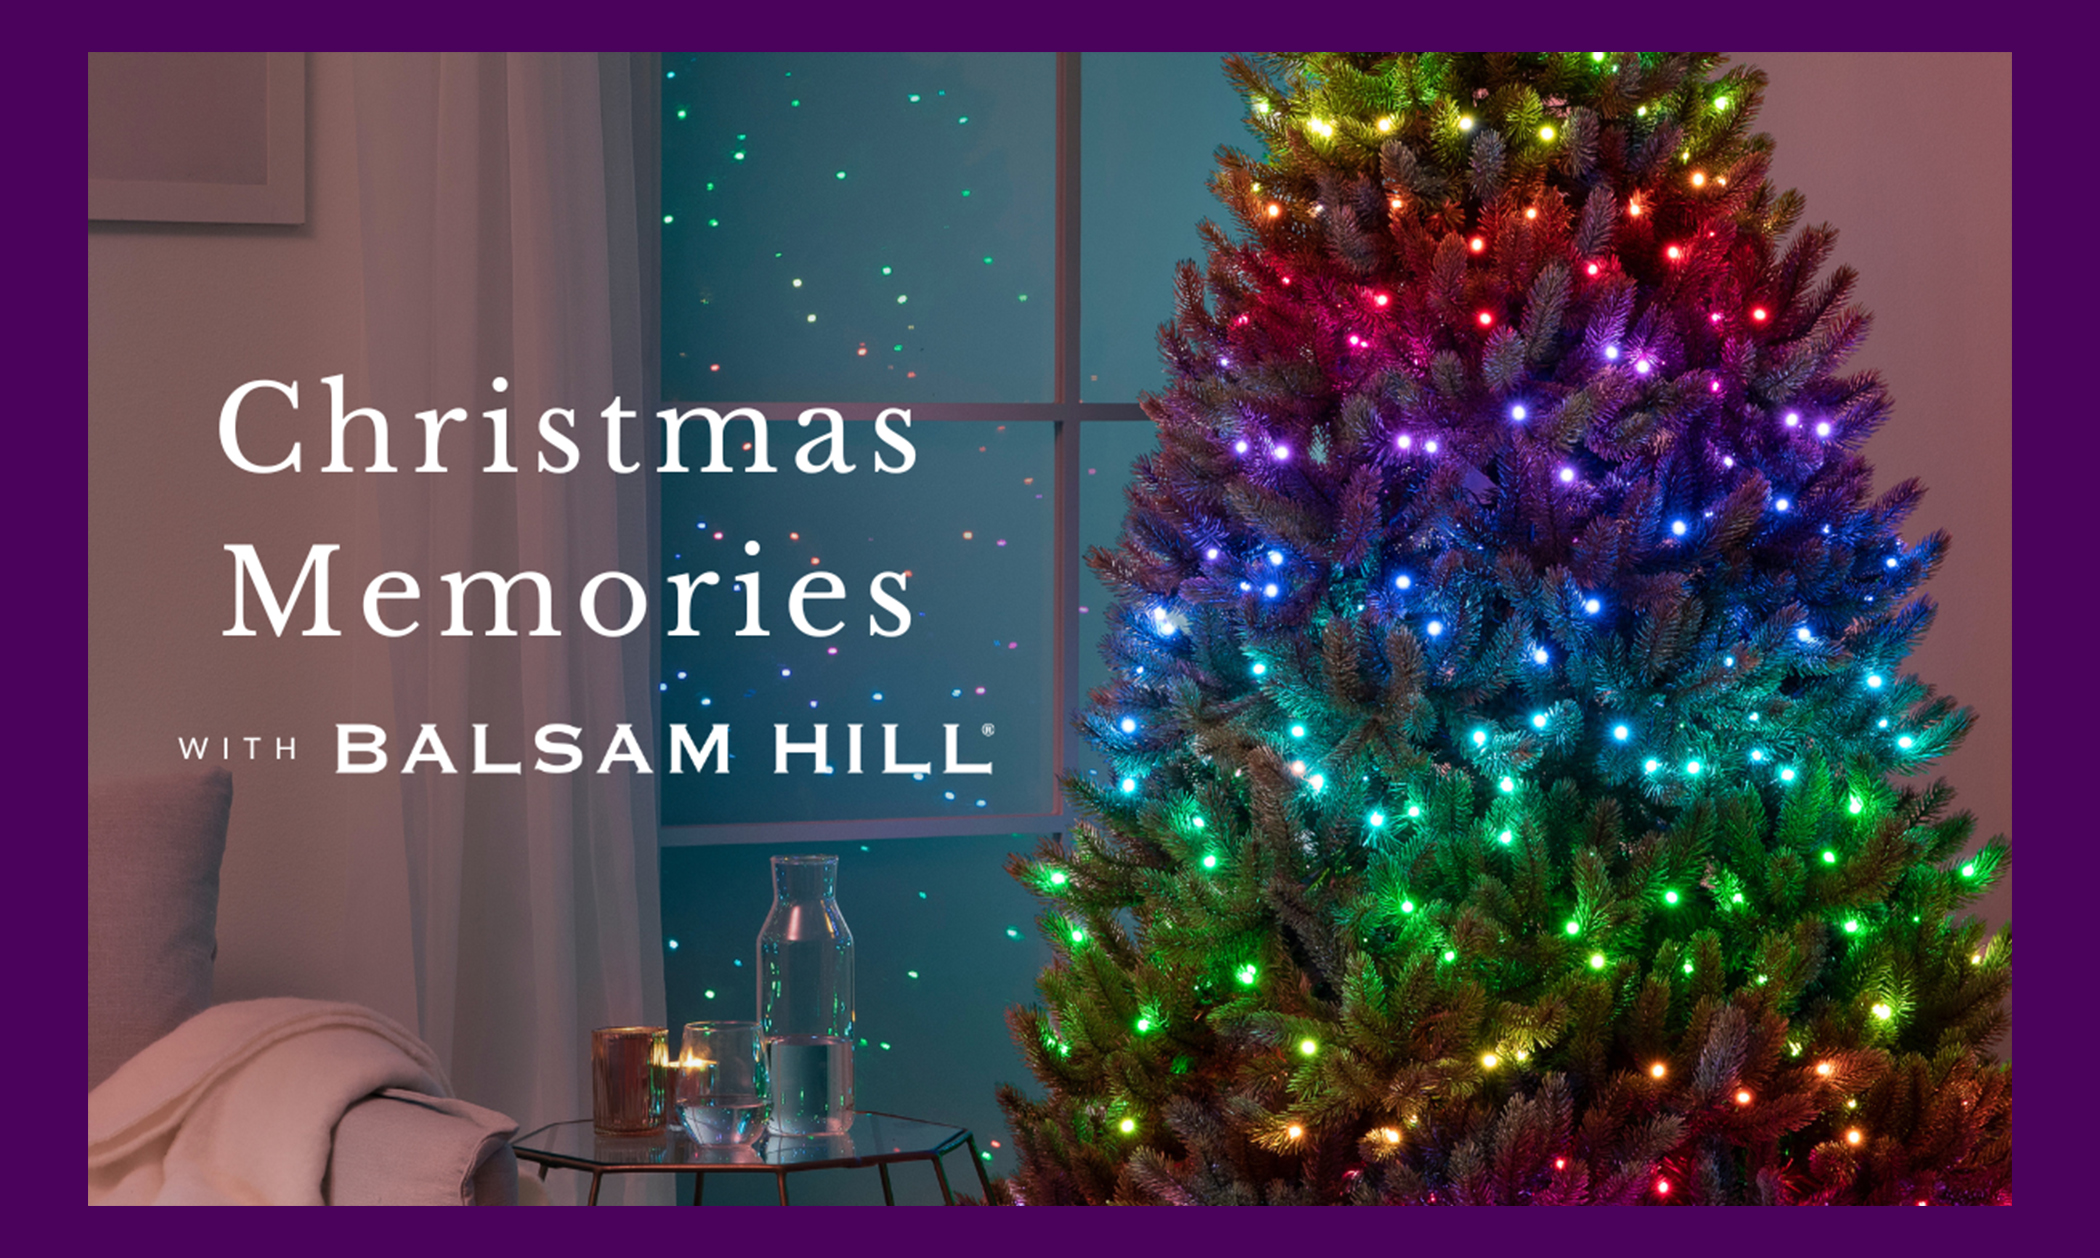 Enter to Win a Balsam Hill Christmas Tree! OKWow Sweepstakes and